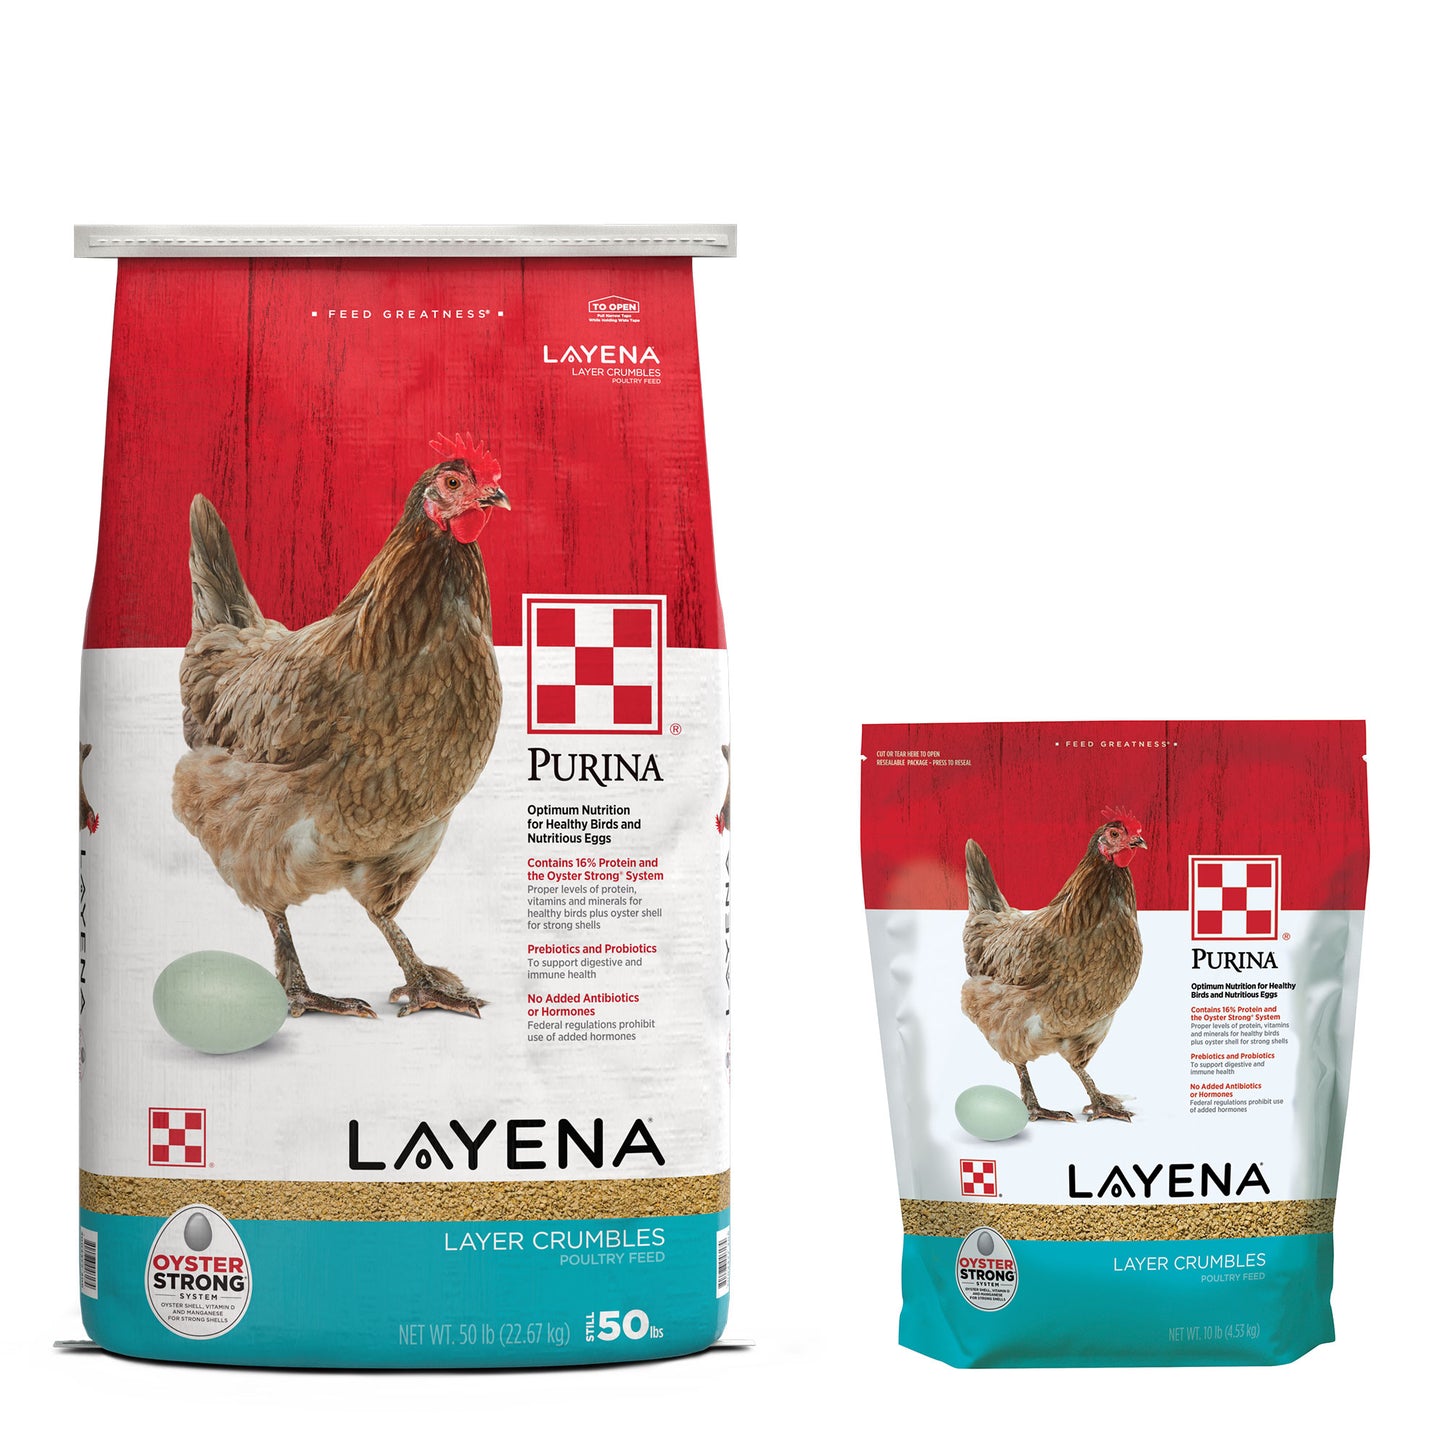 Purina Layena Crumbles 50 Pound Bag and 10 pound pouch grouped together